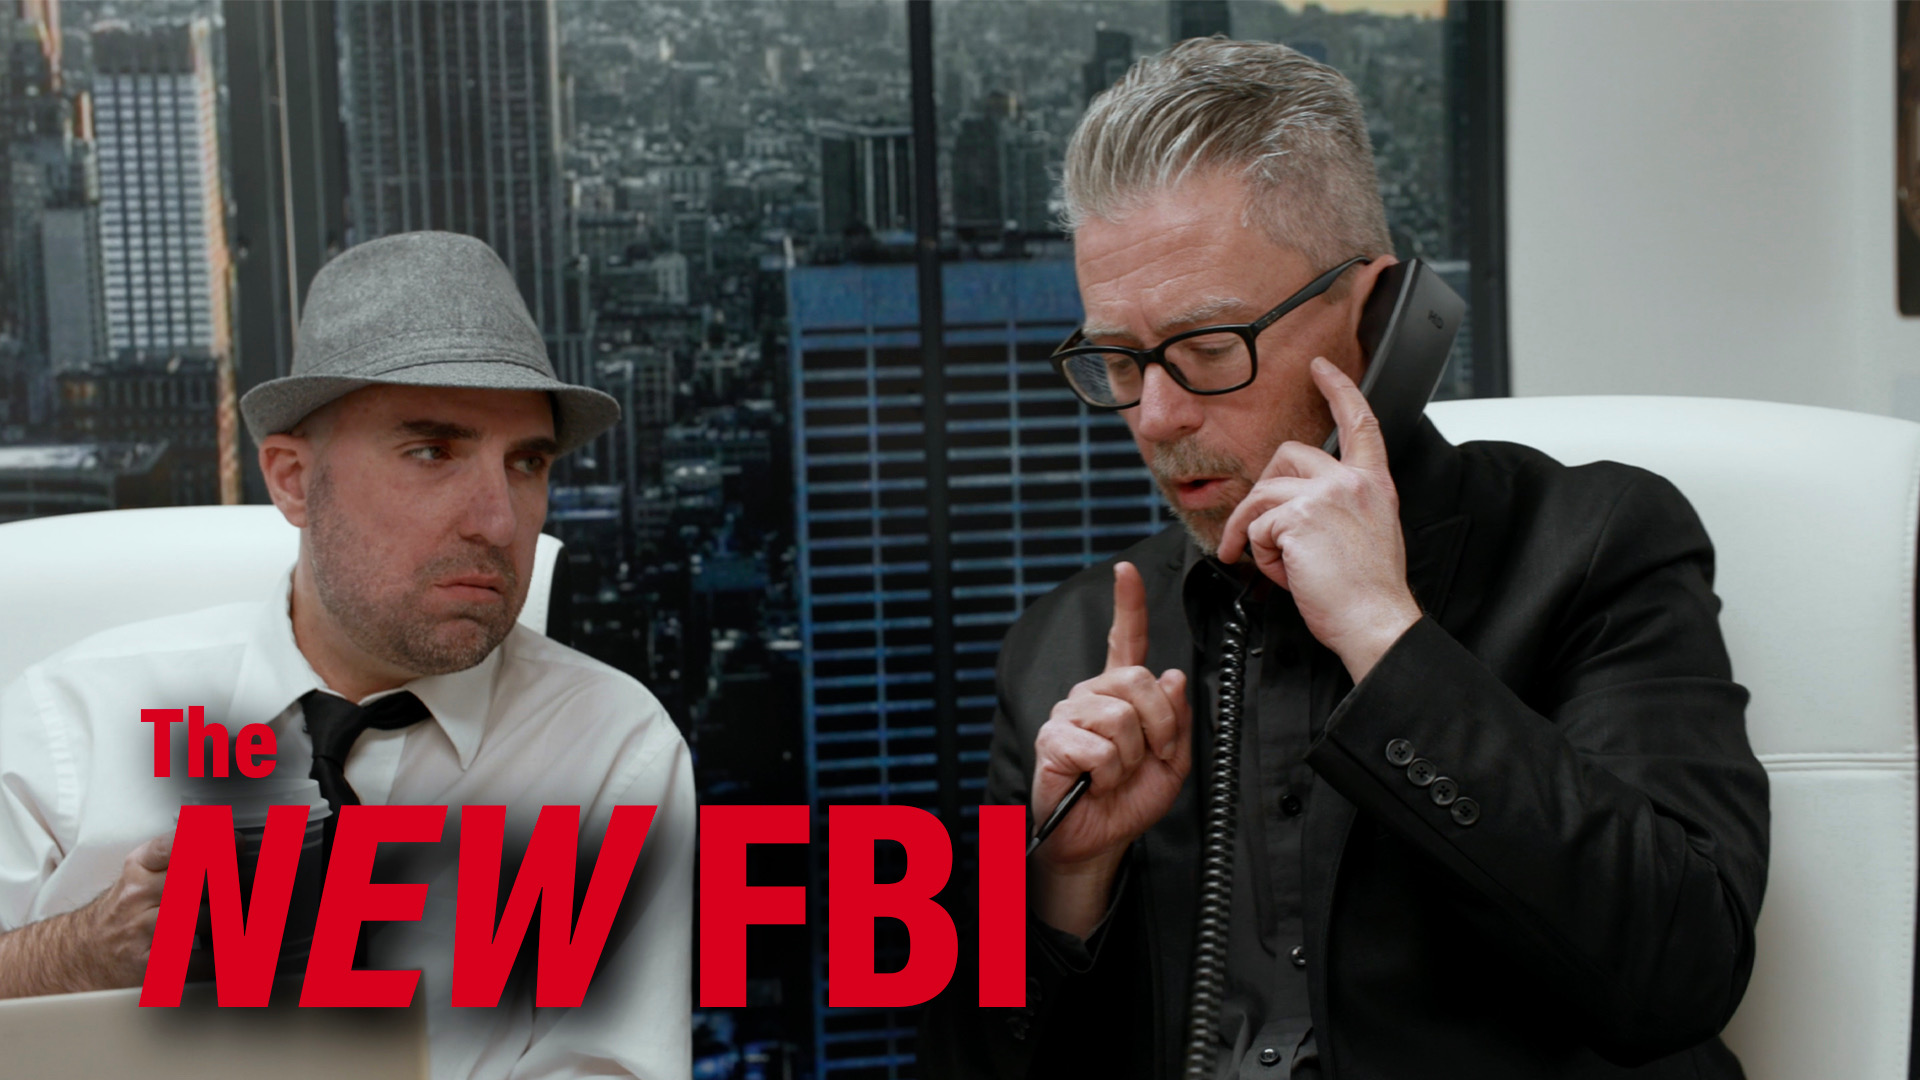 ‘The New FBI’ – Sketch Comedy from ‘That Show Tonight’